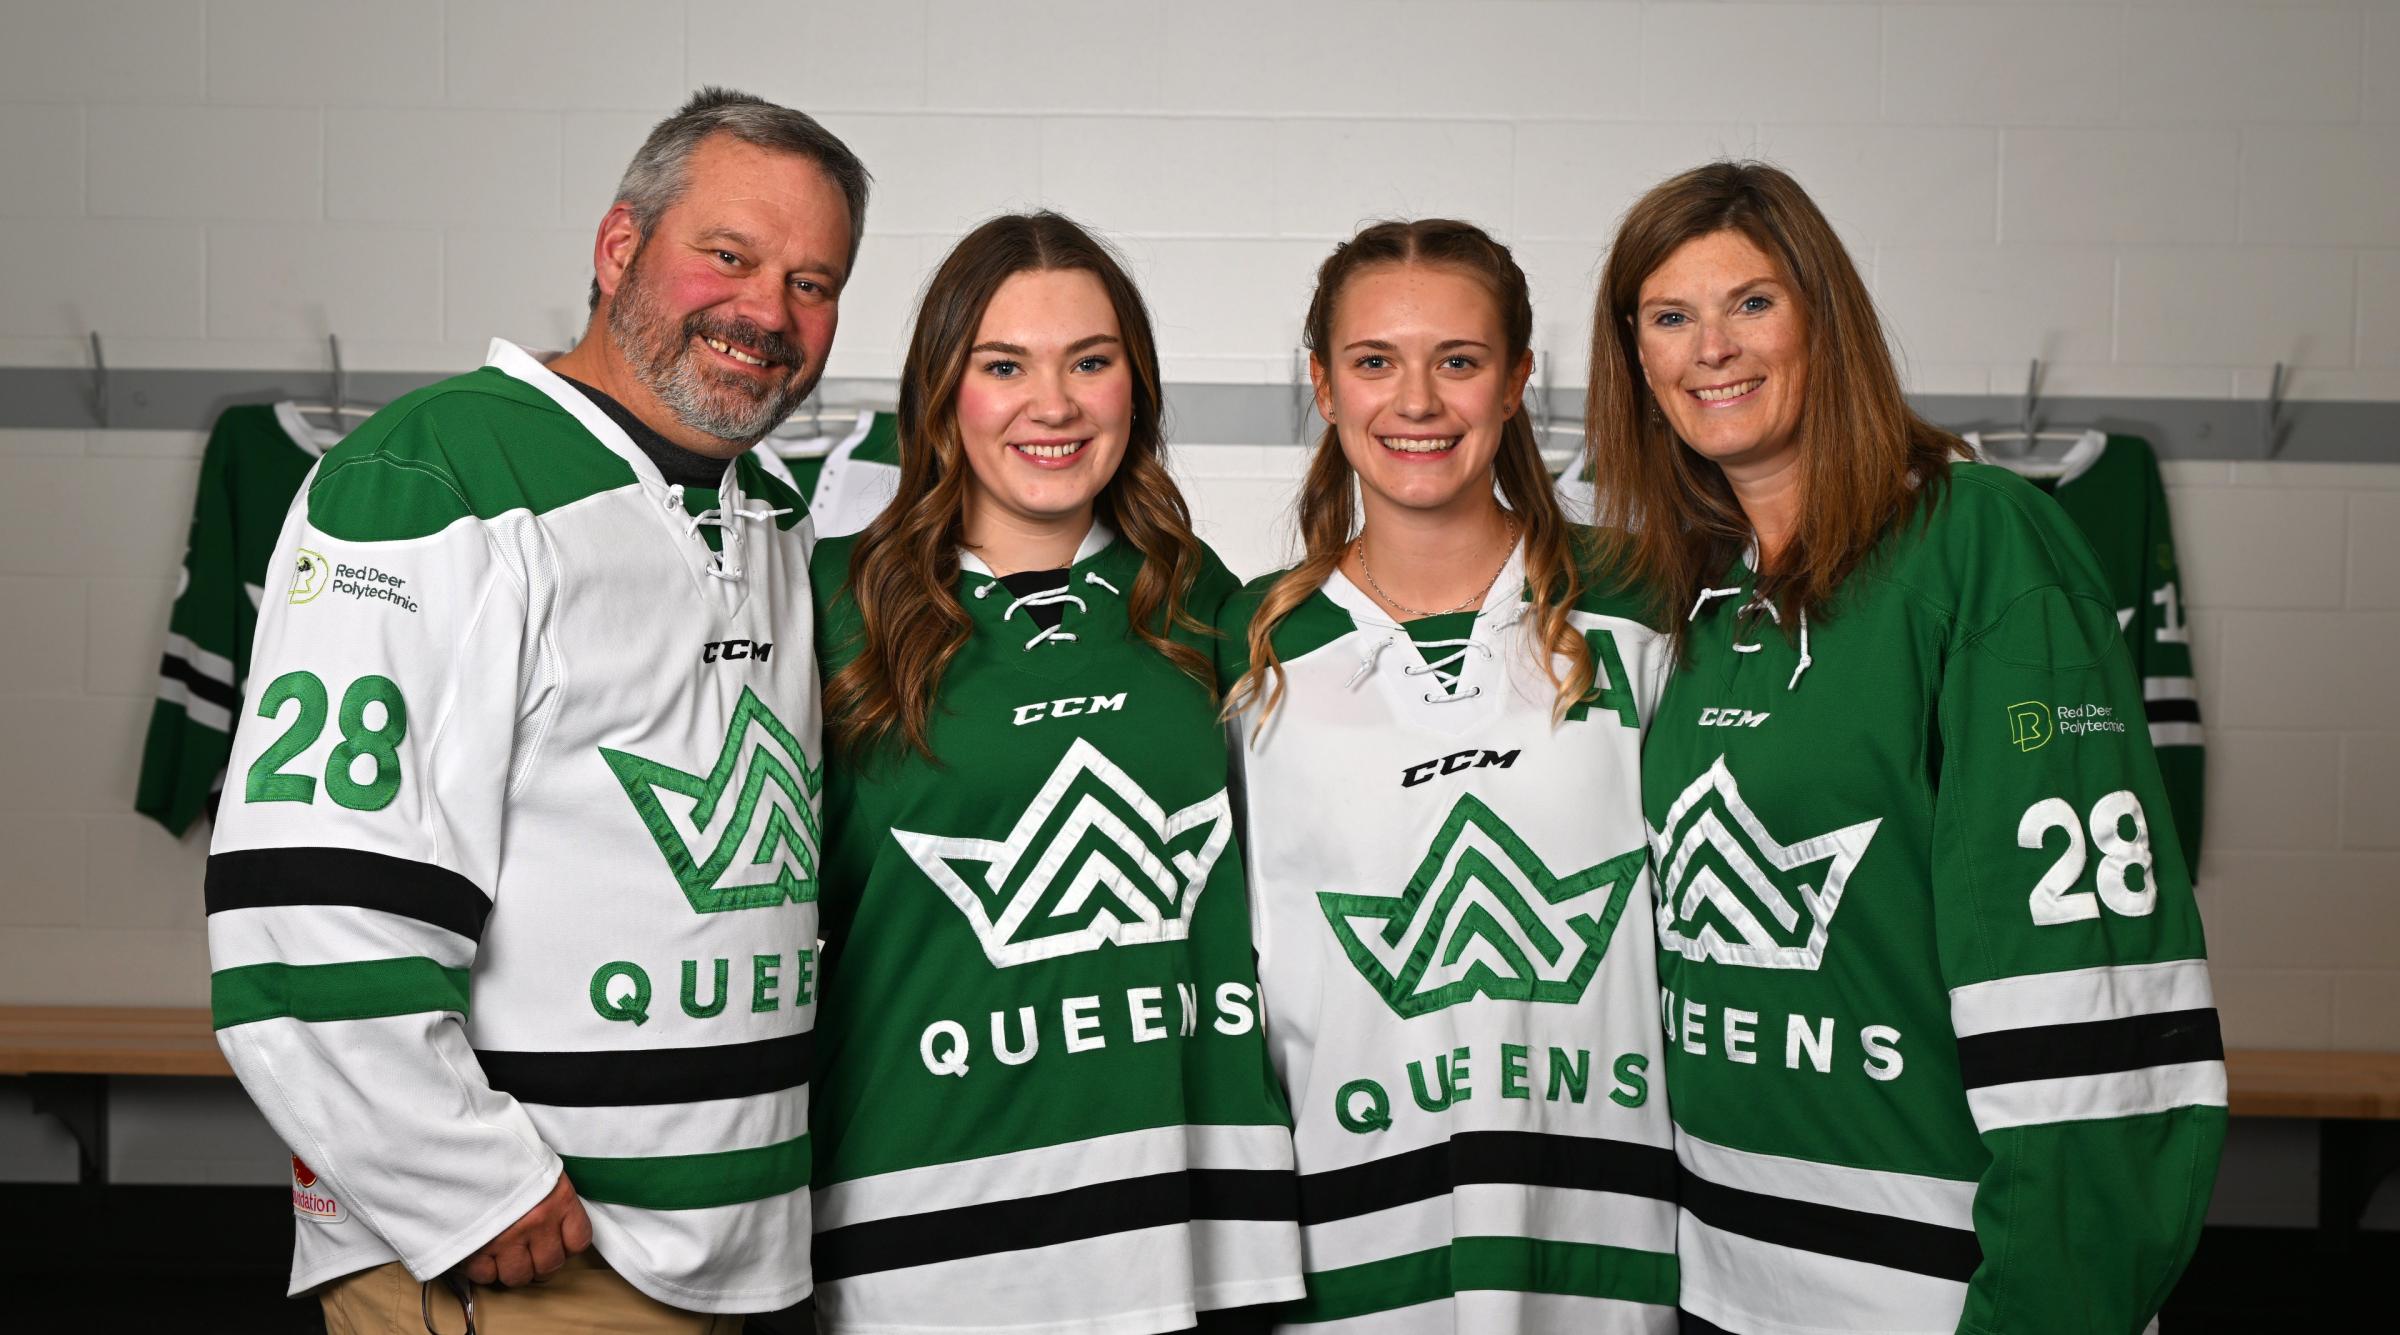 Smiling picture of a family of 4 wearing Queens hockey jerseys